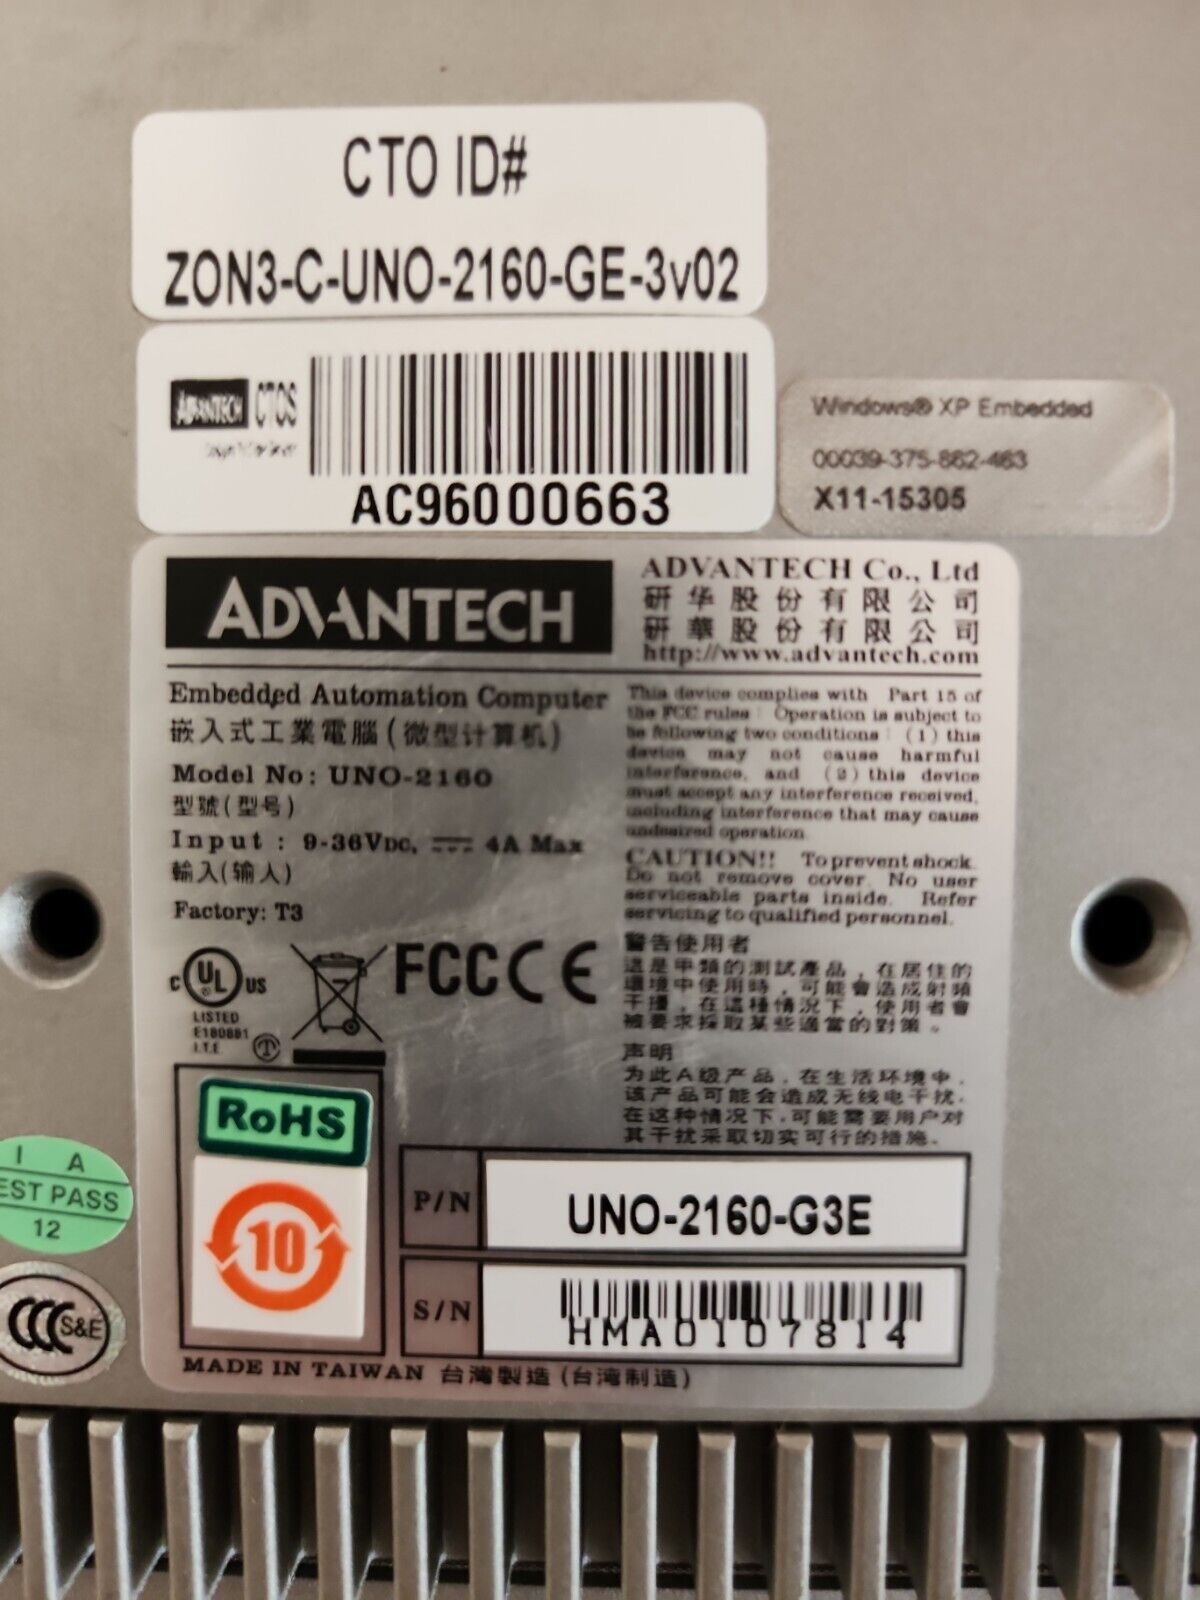 Advantech Embedded Automation Computer ZON3-C-UNO-2160-GE-3v01 NEW